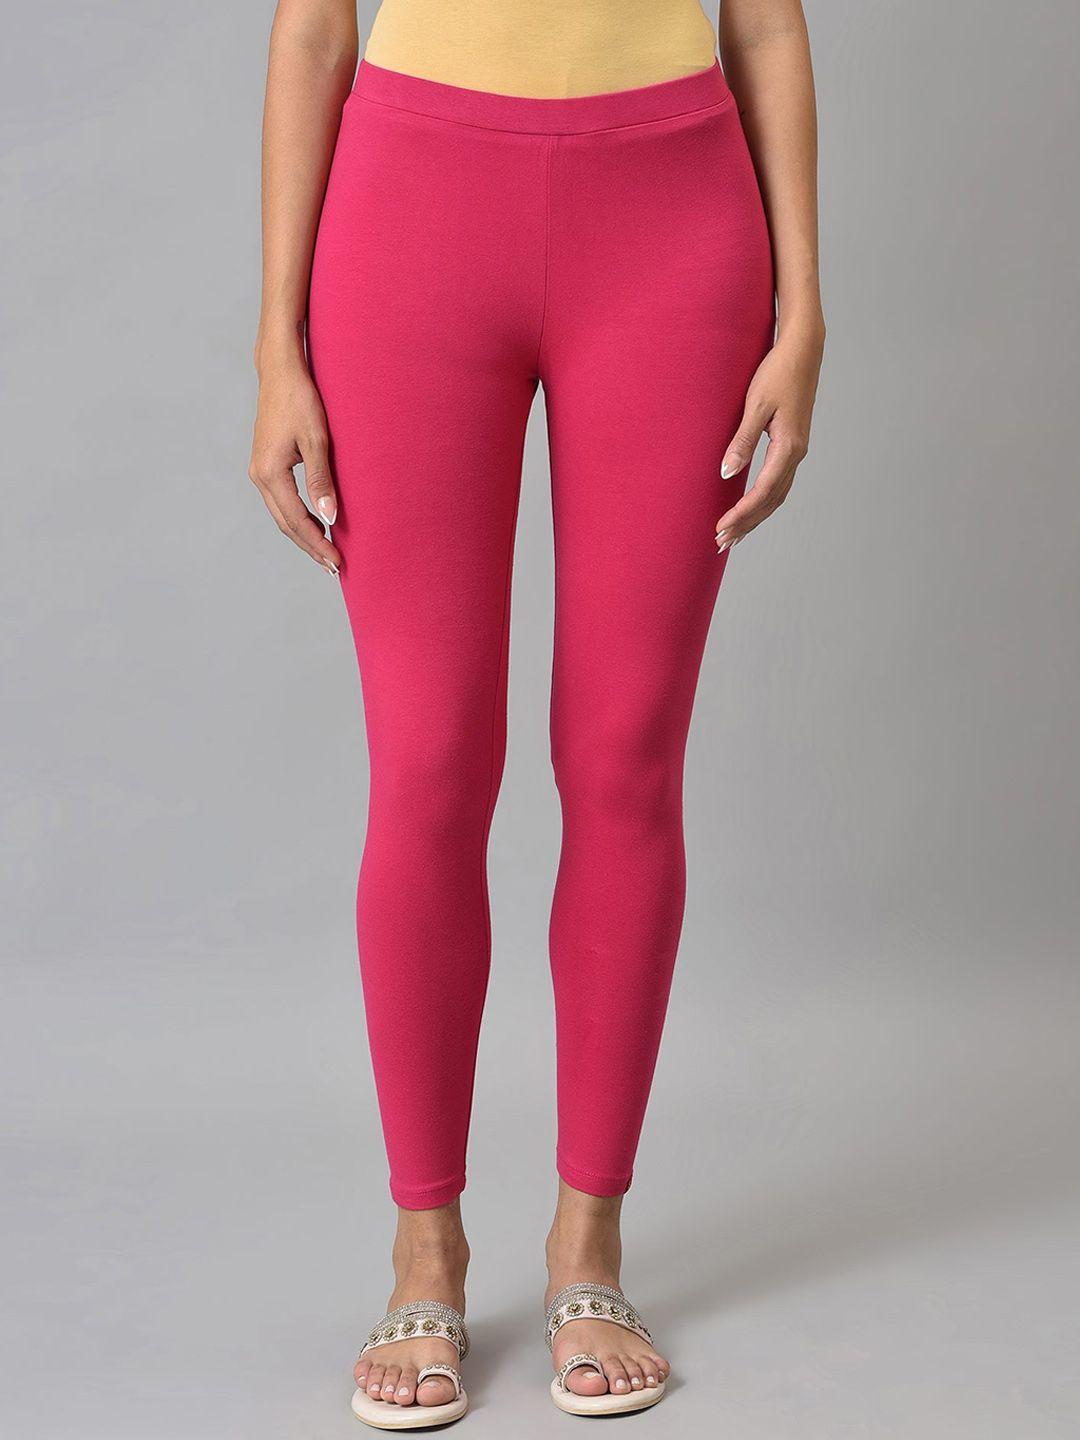 w-women-pink-solid-acrylic-ankle-length-leggings